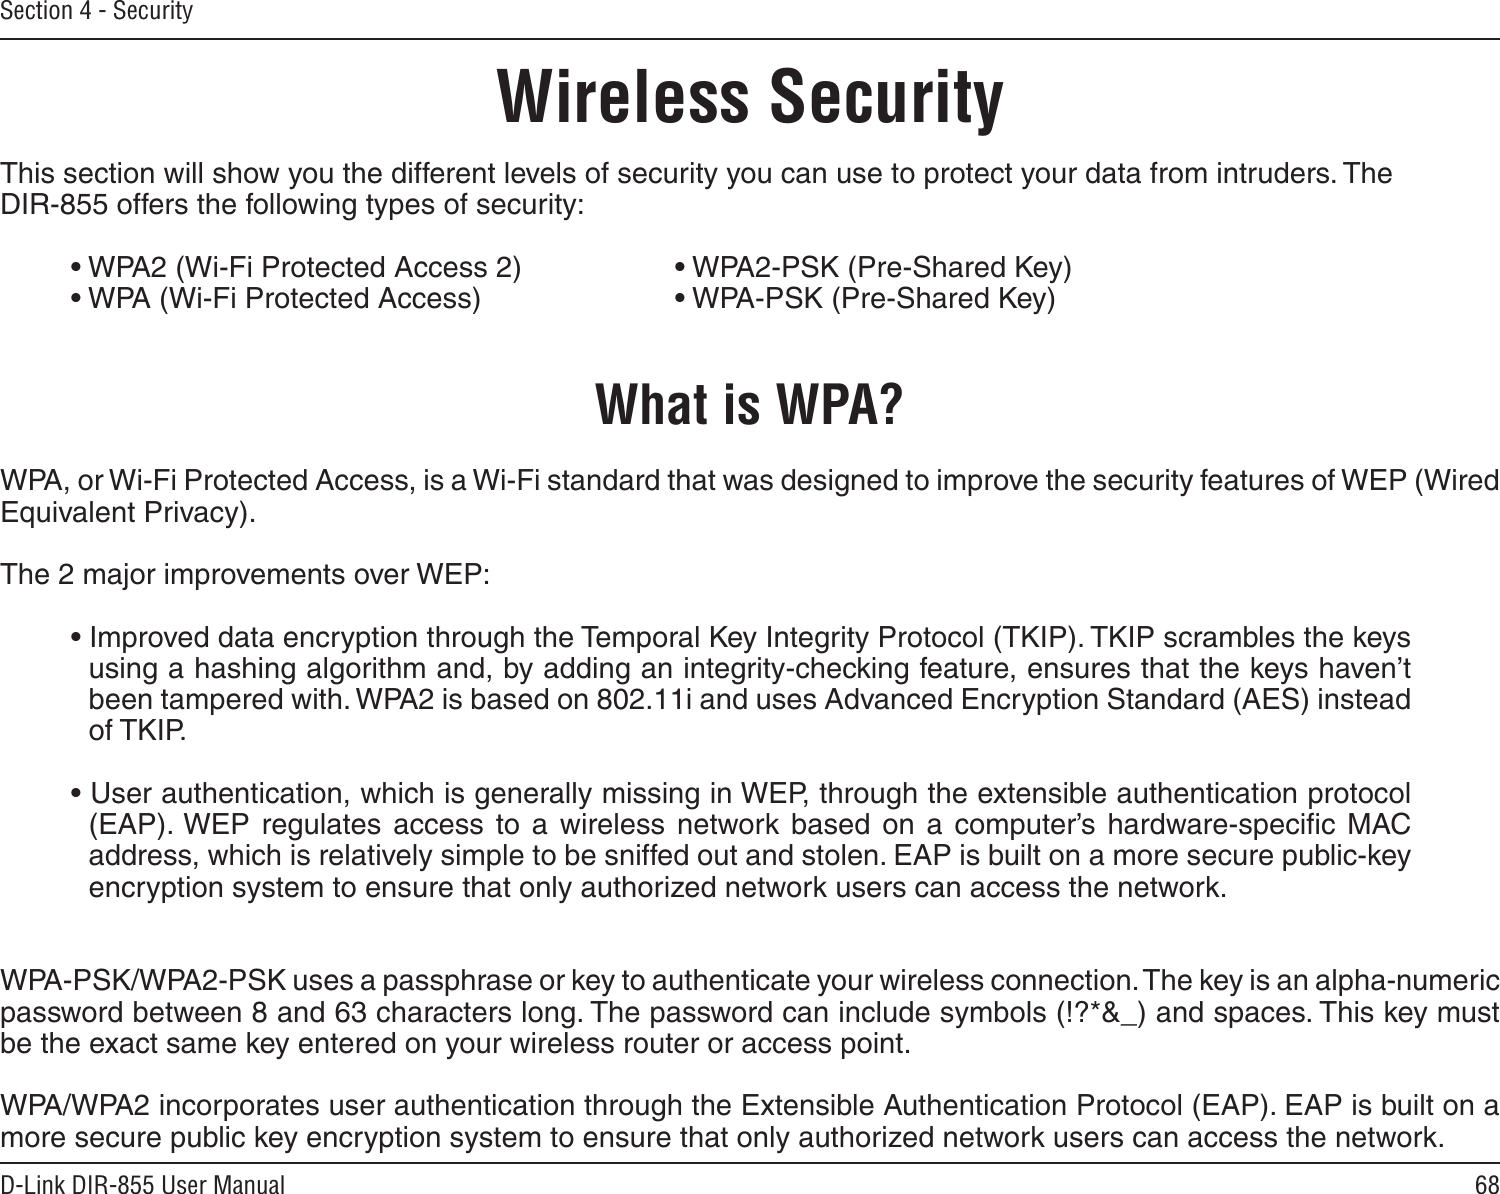 68D-Link DIR-855 User ManualSection 4 - SecurityWireless SecurityThis section will show you the different levels of security you can use to protect your data from intruders. The DIR-855 offers the following types of security:• WPA2 (Wi-Fi Protected Access 2)     • WPA2-PSK (Pre-Shared Key)• WPA (Wi-Fi Protected Access)      • WPA-PSK (Pre-Shared Key)What is WPA?WPA, or Wi-Fi Protected Access, is a Wi-Fi standard that was designed to improve the security features of WEP (Wired Equivalent Privacy).  The 2 major improvements over WEP: • Improved data encryption through the Temporal Key Integrity Protocol (TKIP). TKIP scrambles the keys using a hashing algorithm and, by adding an integrity-checking feature, ensures that the keys haven’t been tampered with. WPA2 is based on 802.11i and uses Advanced Encryption Standard (AES) instead of TKIP.• User authentication, which is generally missing in WEP, through the extensible authentication protocol (EAP). WEP  regulates  access  to  a  wireless  network  based  on  a  computer’s  hardware-speciﬁc MAC address, which is relatively simple to be sniffed out and stolen. EAP is built on a more secure public-key encryption system to ensure that only authorized network users can access the network.WPA-PSK/WPA2-PSK uses a passphrase or key to authenticate your wireless connection. The key is an alpha-numeric password between 8 and 63 characters long. The password can include symbols (!?*&amp;_) and spaces. This key must be the exact same key entered on your wireless router or access point.WPA/WPA2 incorporates user authentication through the Extensible Authentication Protocol (EAP). EAP is built on a more secure public key encryption system to ensure that only authorized network users can access the network.